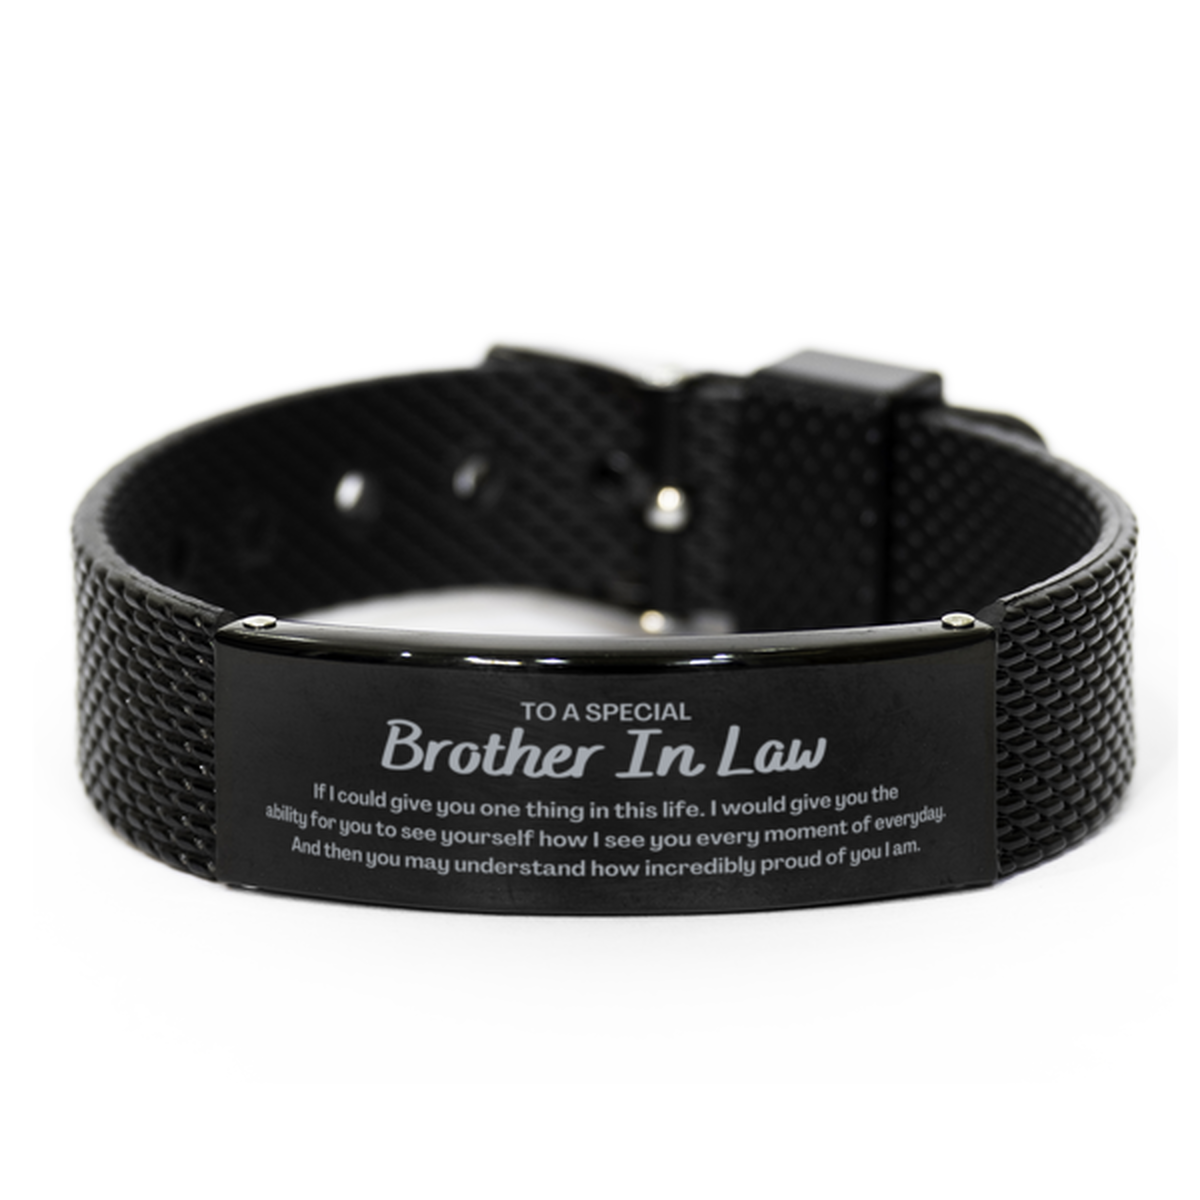 To My Brother In Law Black Shark Mesh Bracelet, Gifts For Brother In Law Engraved, Inspirational Gifts for Christmas Birthday, Epic Gifts for Brother In Law To A Special Brother In Law how incredibly proud of you I am